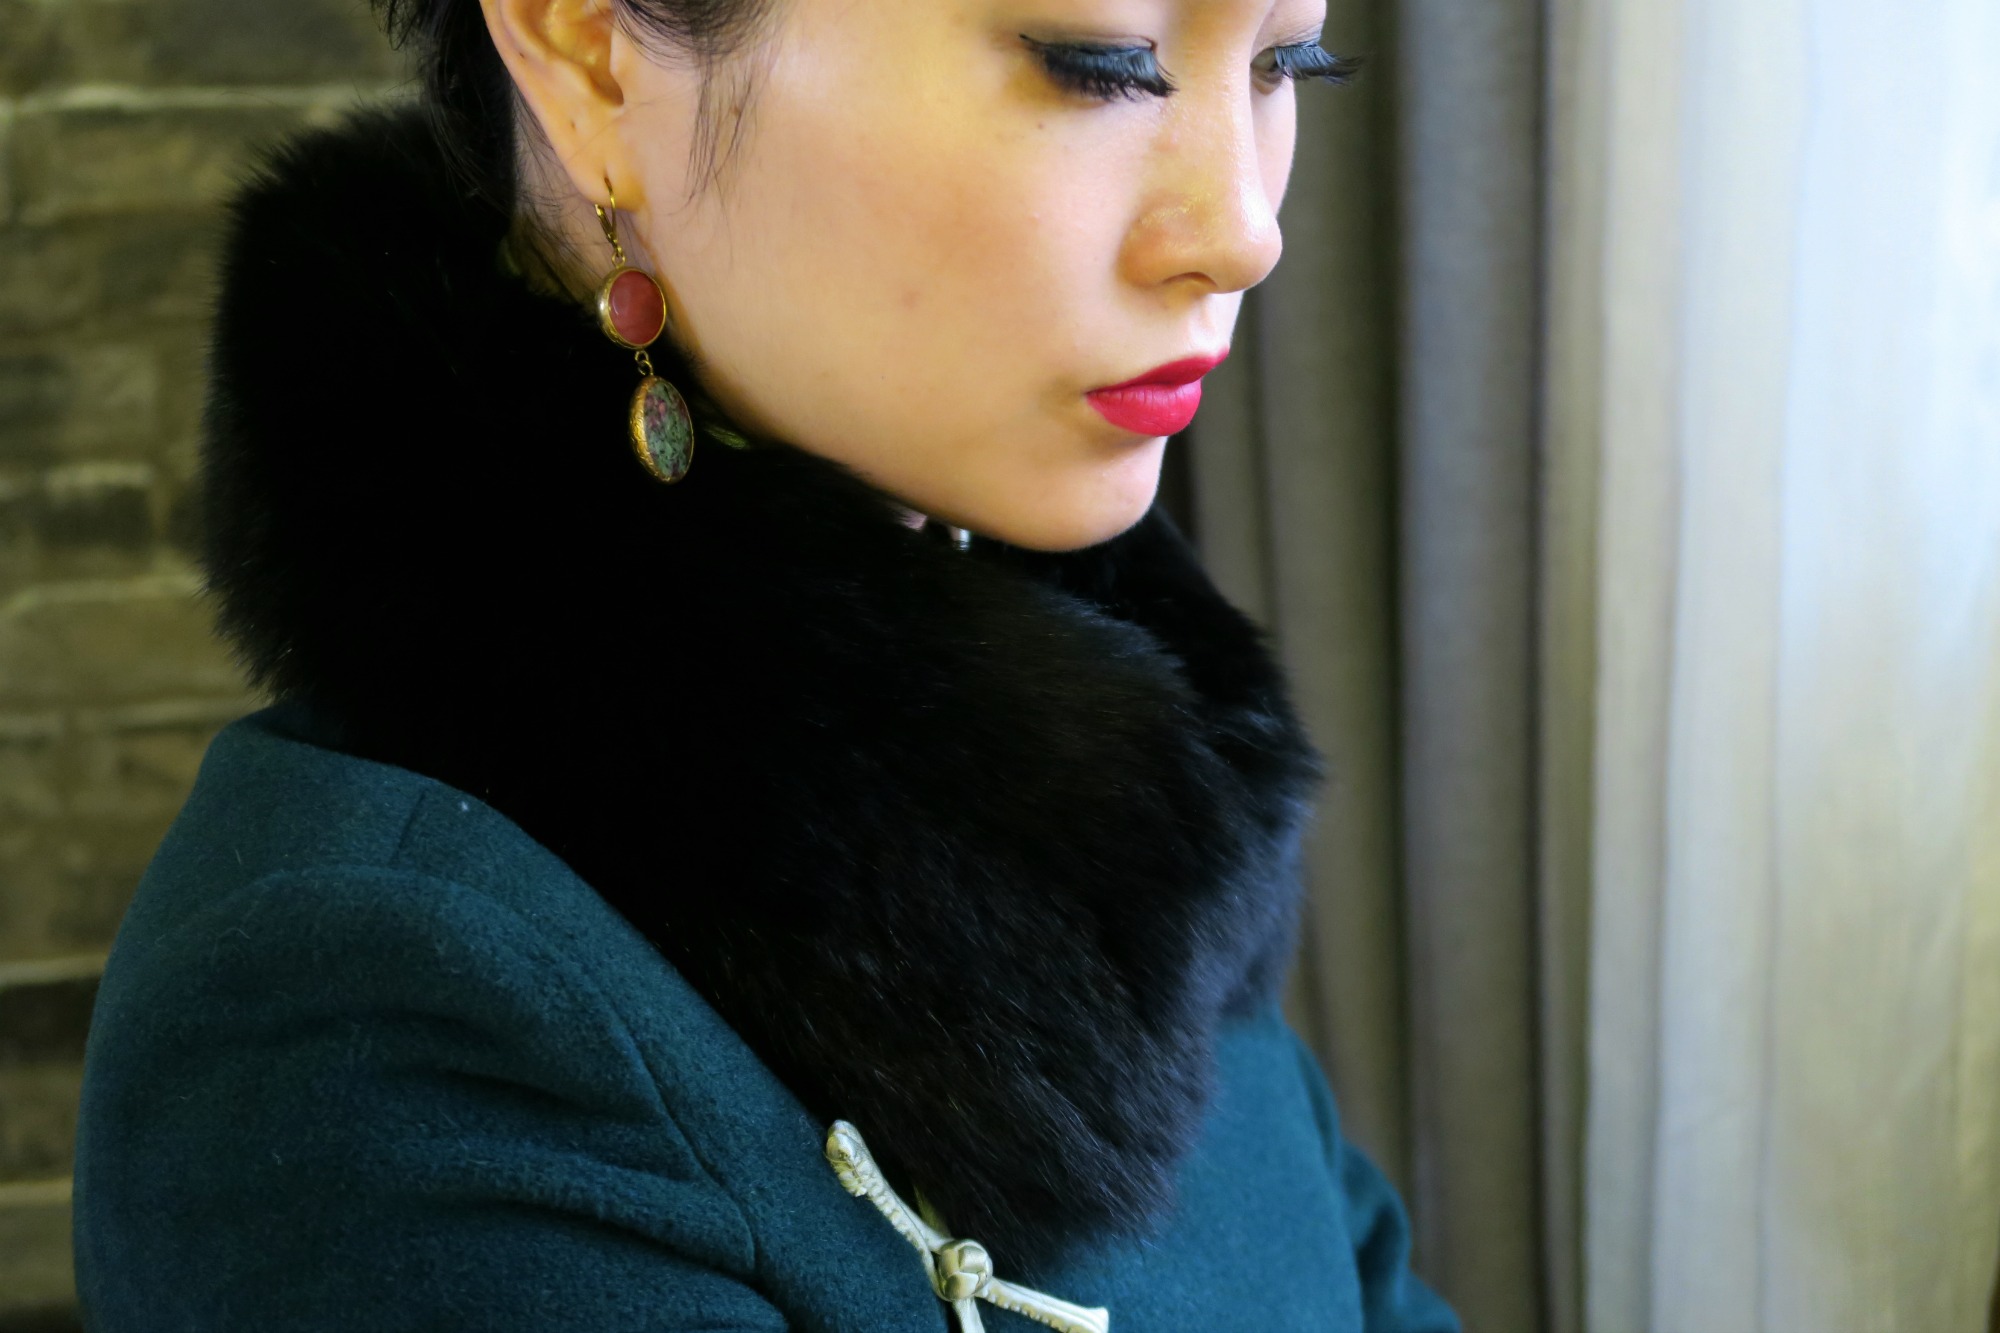 Wearing my forest green cashmere warm winter qipao/cheongsam with a vintage black fur collar